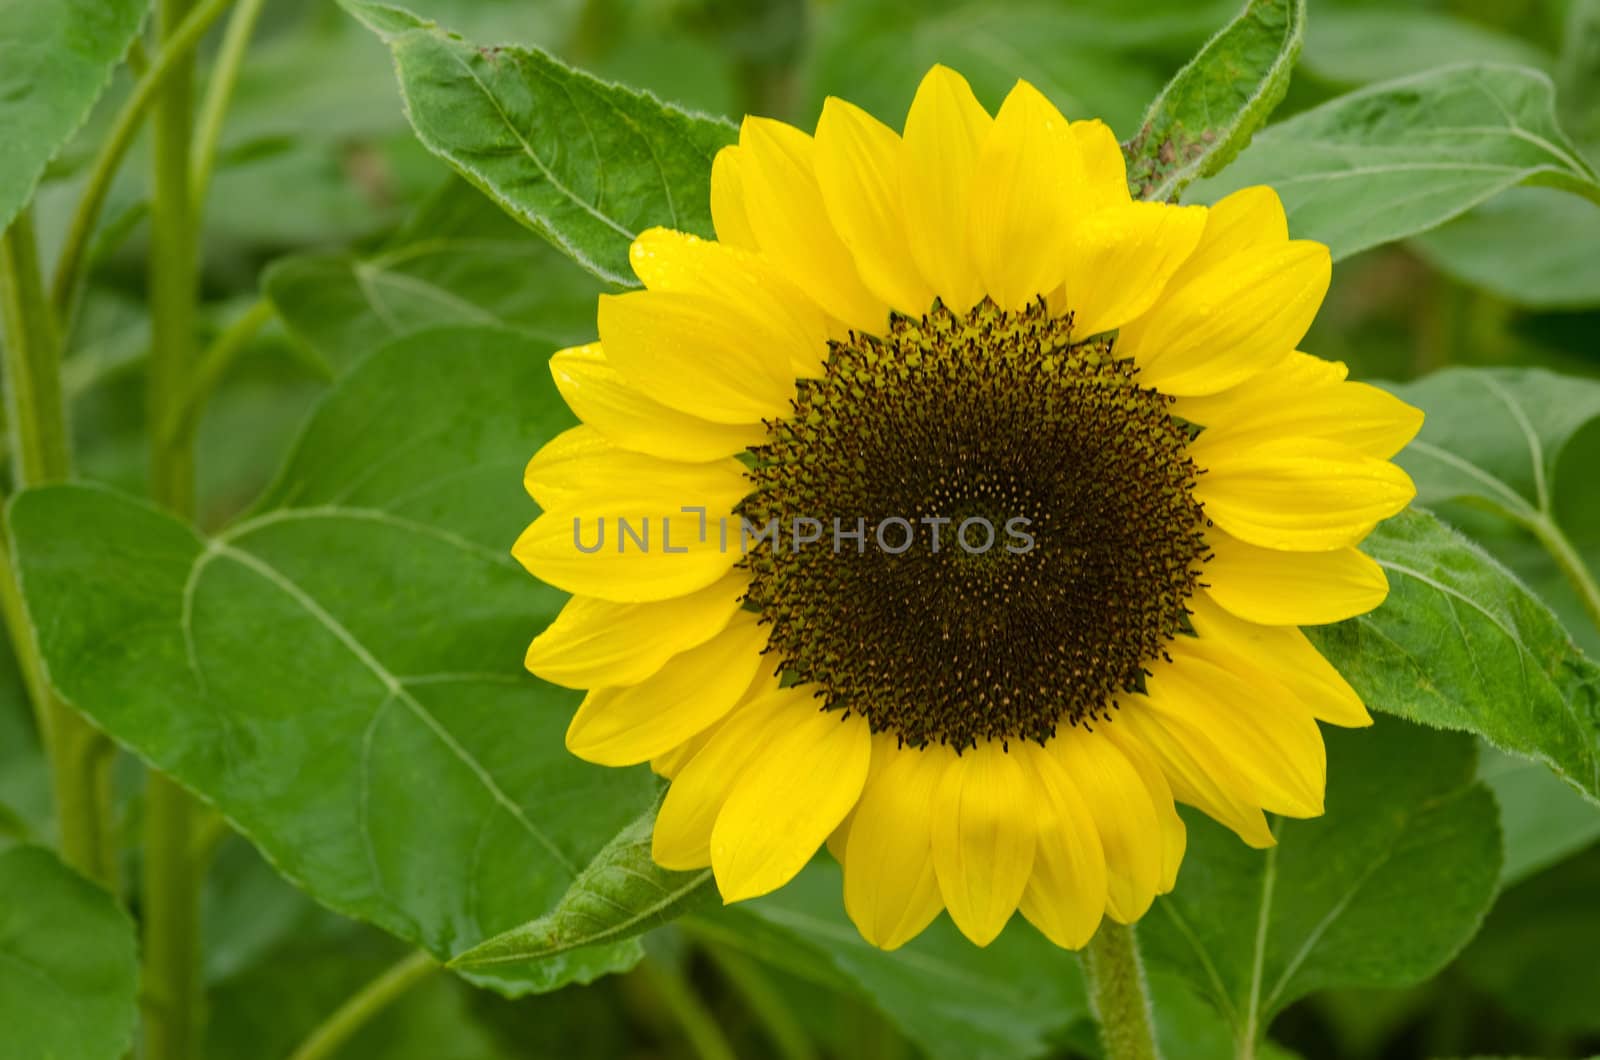 A single sun flower in front of green background